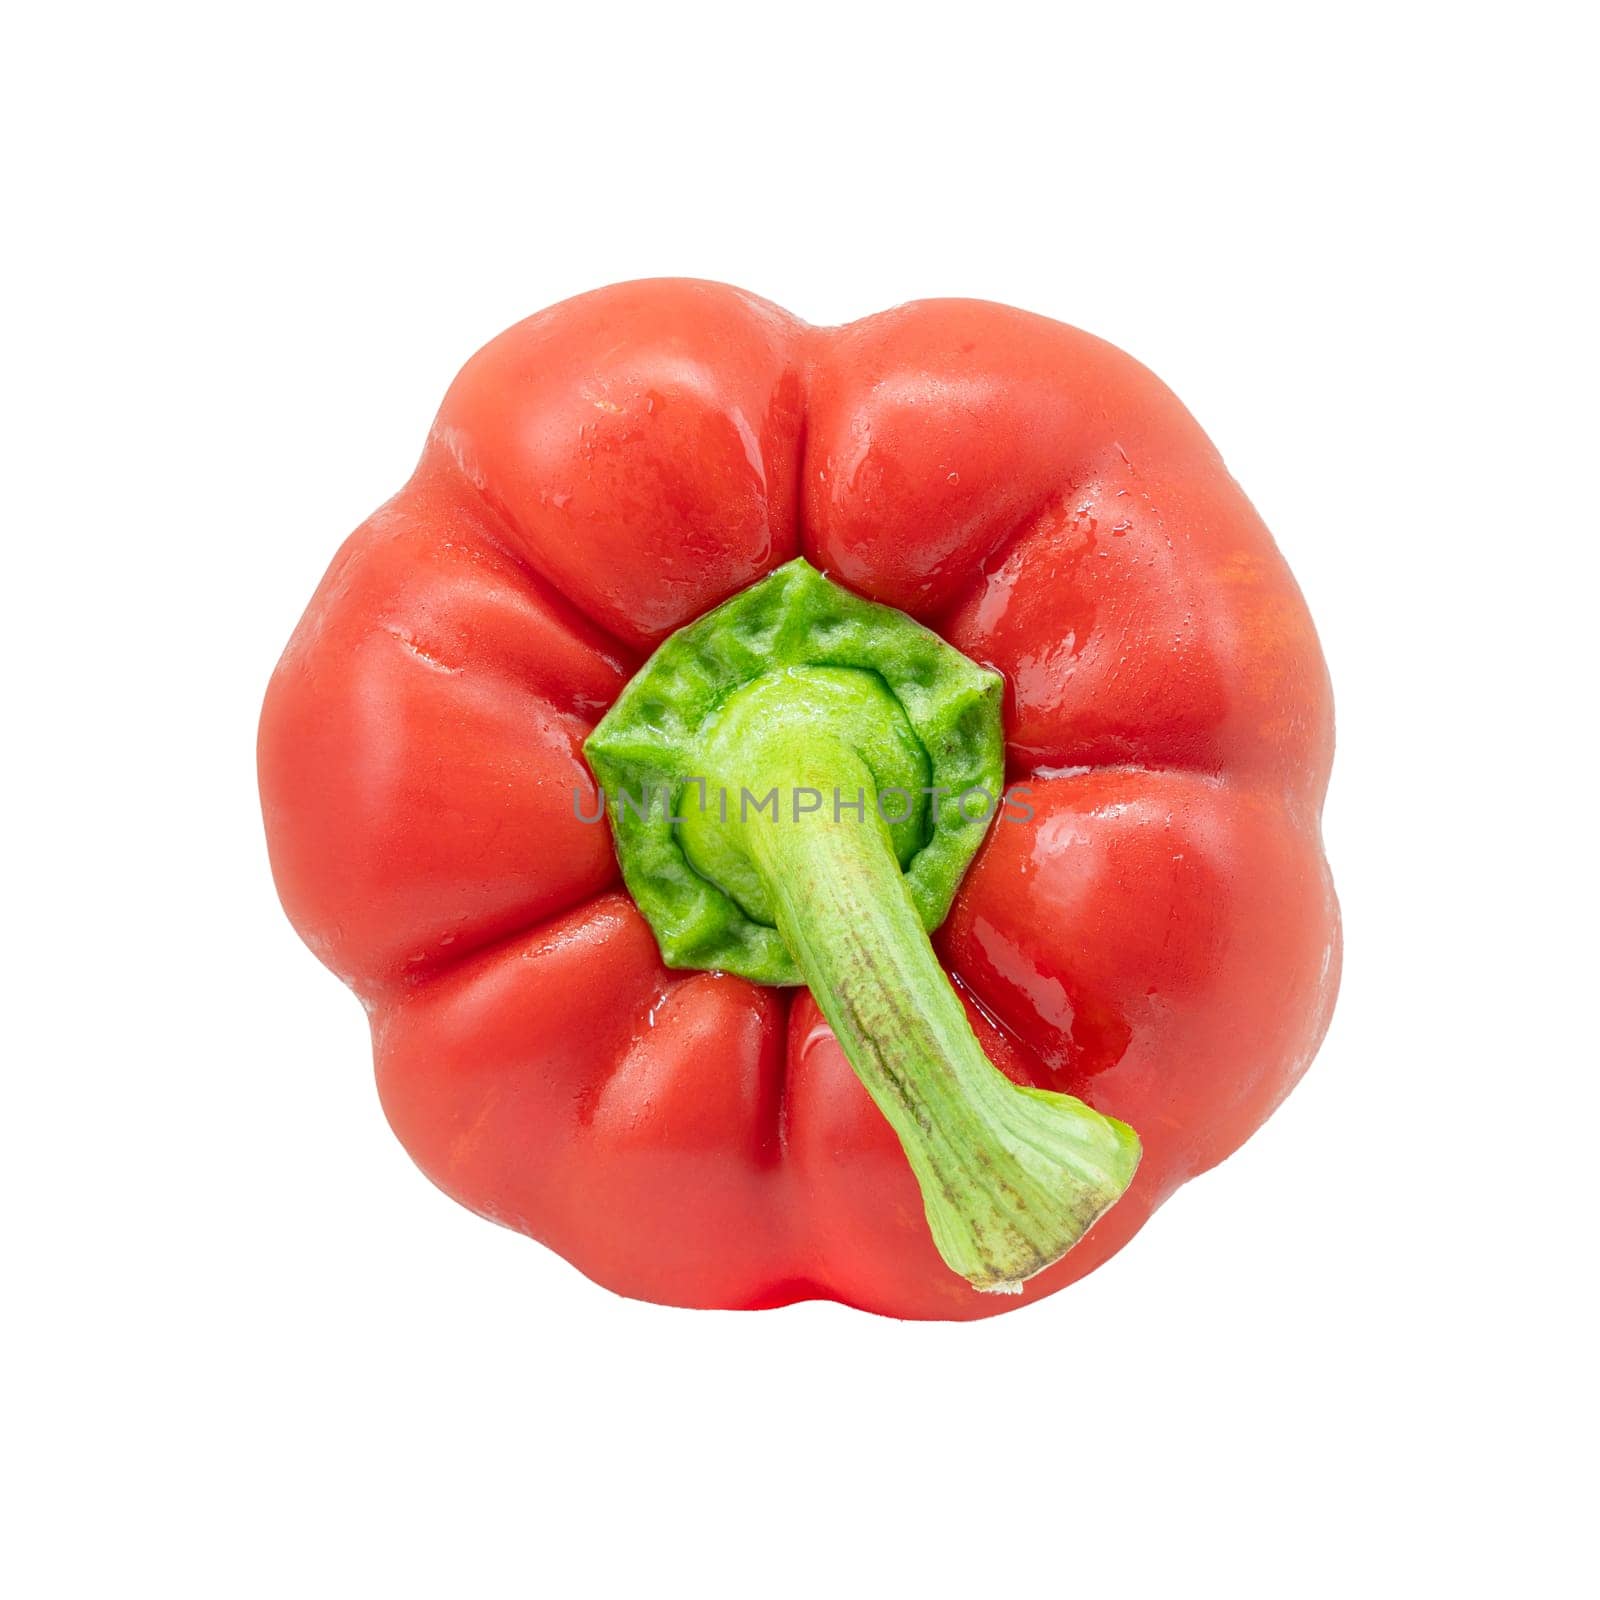 Bell pepper,Capcicum,Sweet peeper,isolated on white background